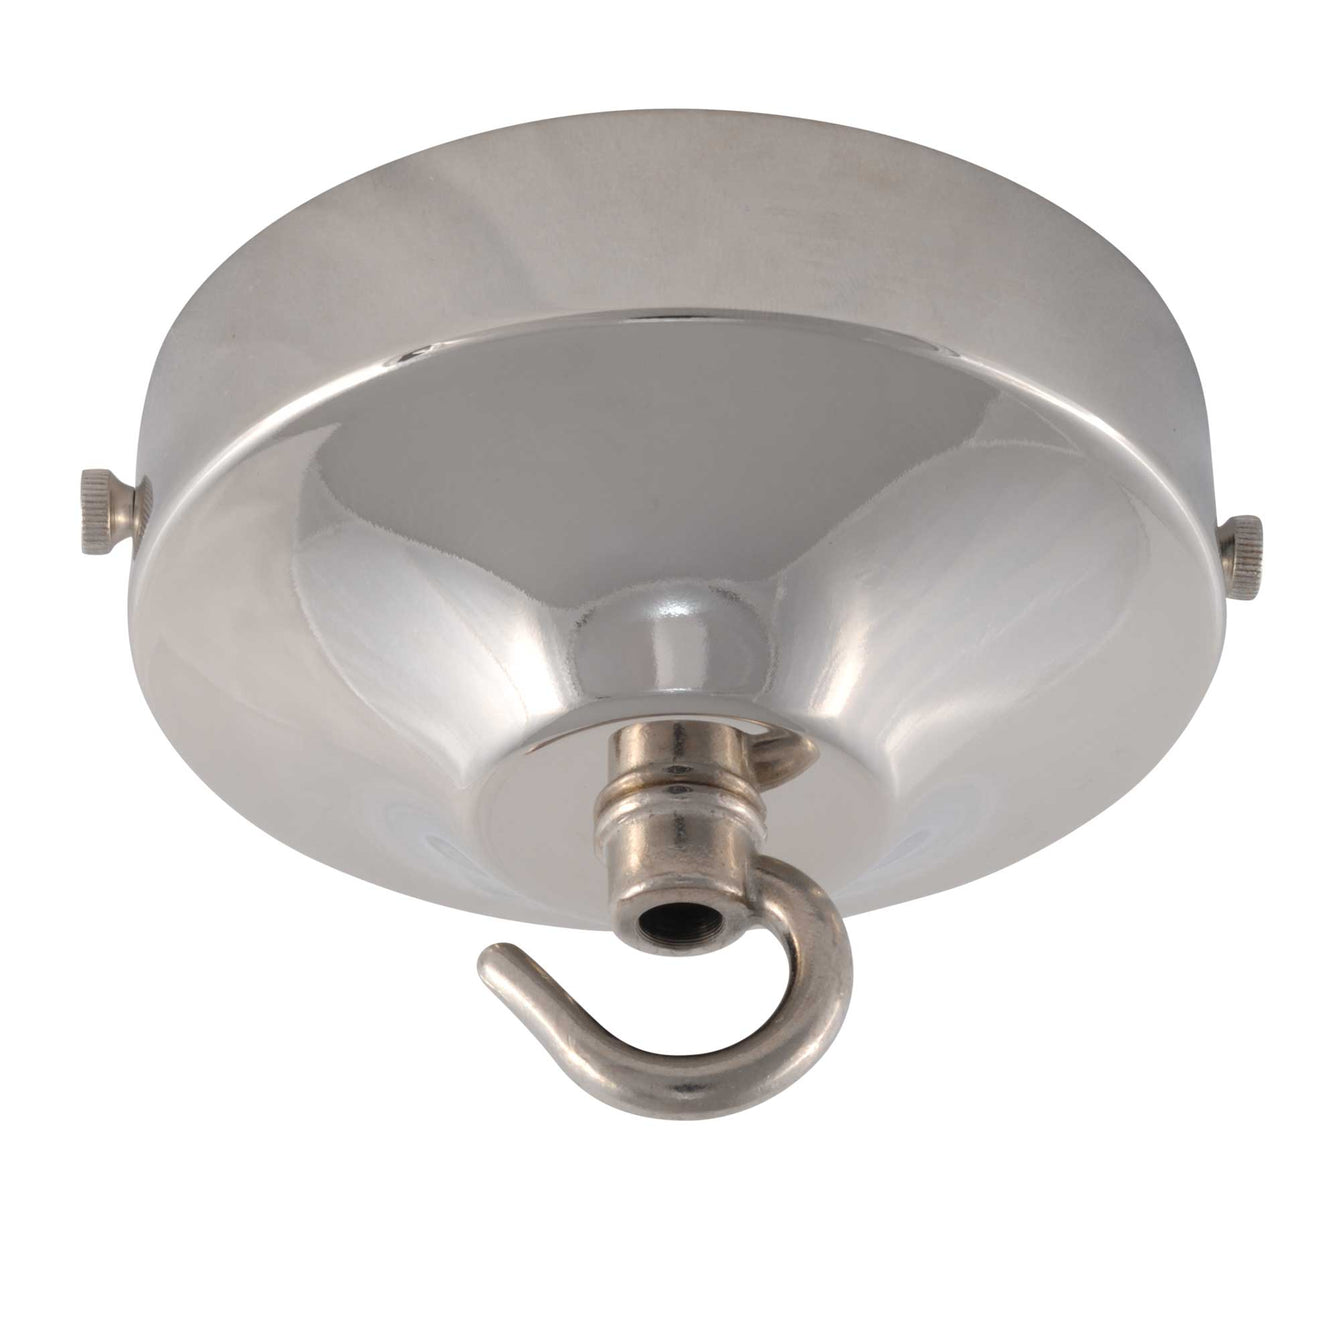 ElekTek 100mm Diameter Convex Ceiling Rose with Strap Bracket and Hook Metallic and Powder Coated Finishes Dawn Blue